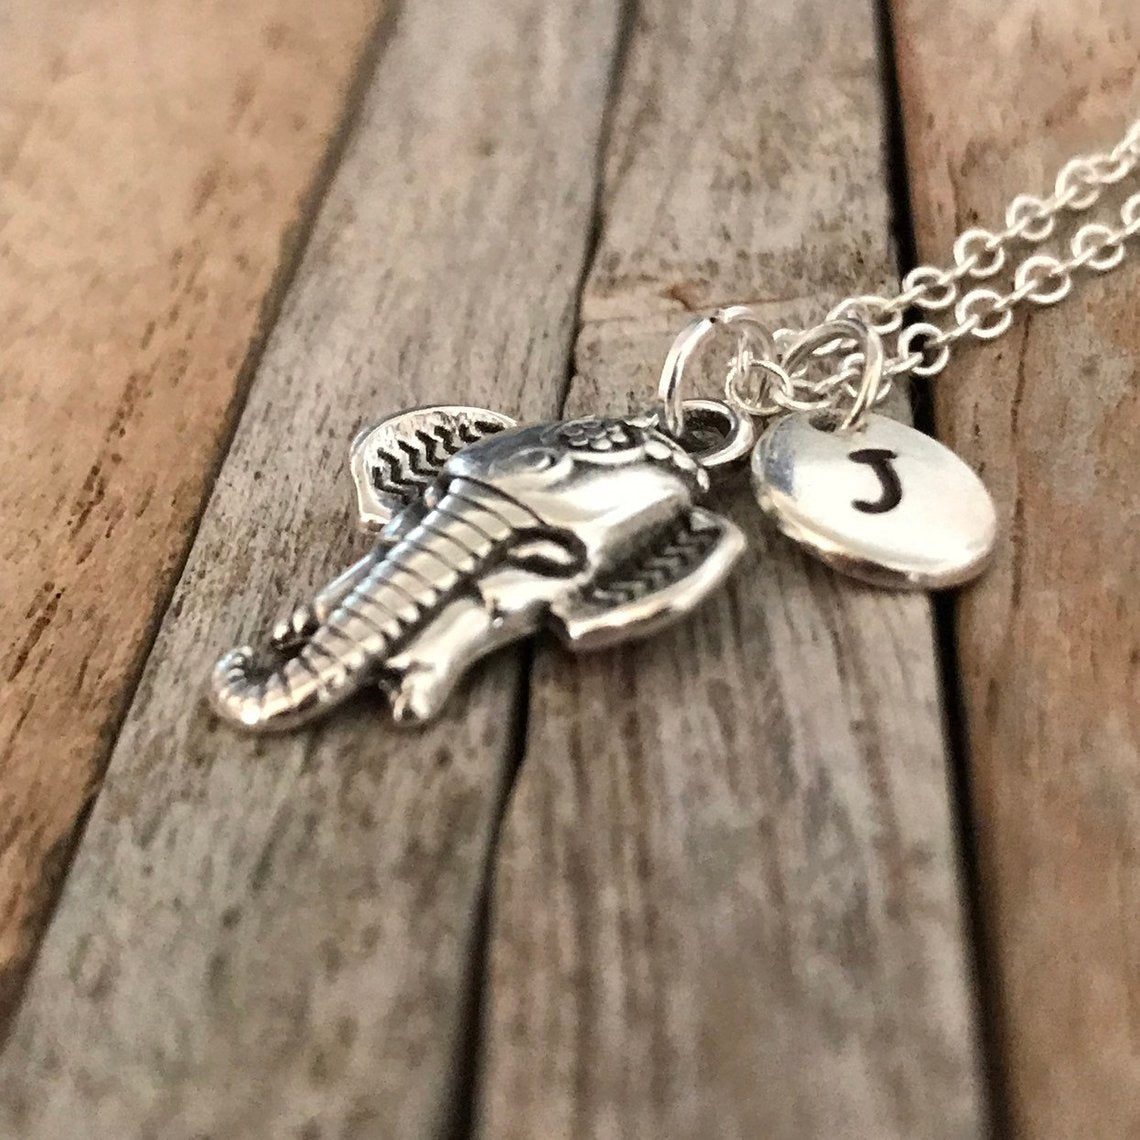 Personalized custom elephant necklace, Good luck charm